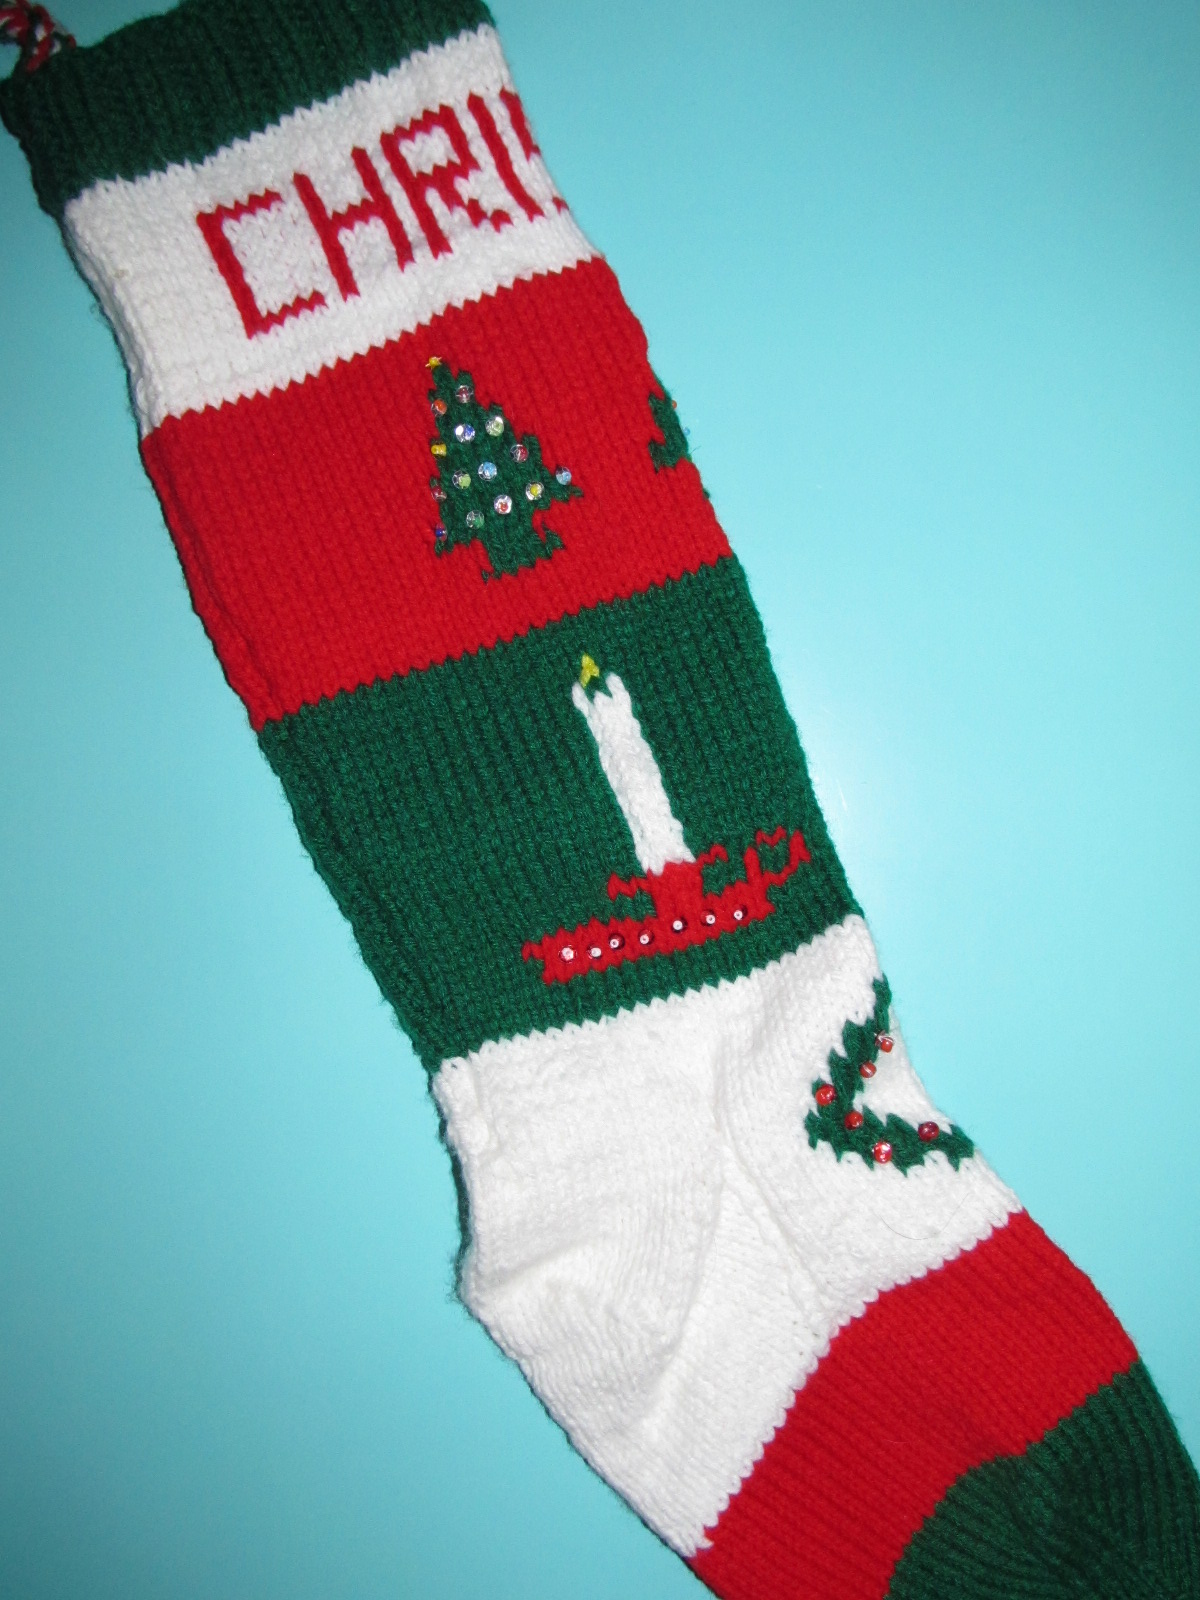 Simply Crochet and Other Crafts: Knit Christmas Stocking